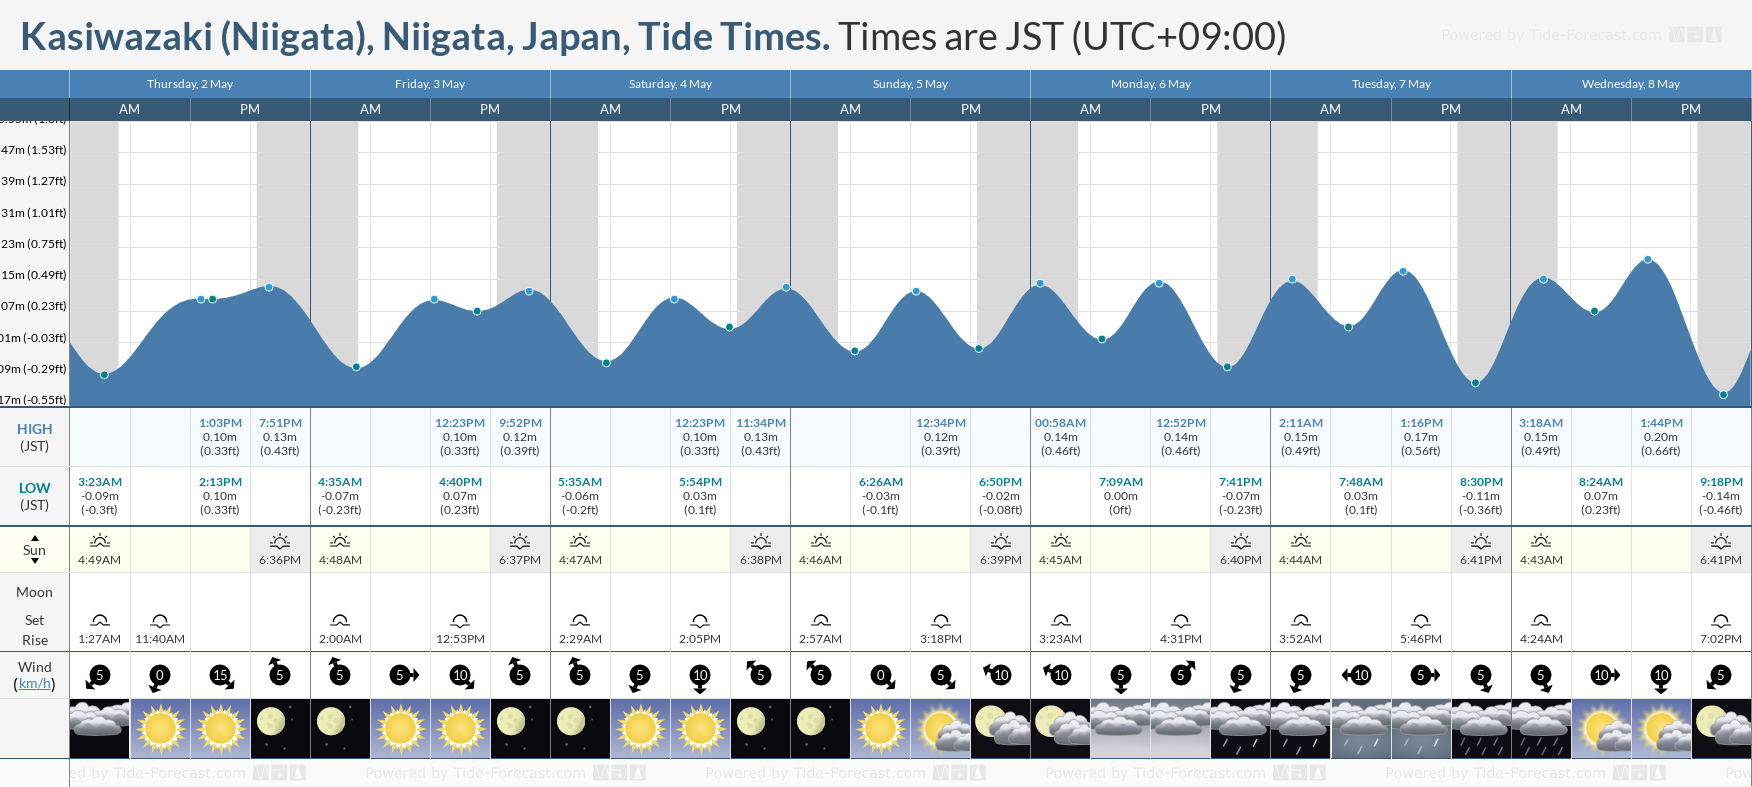 Kasiwazaki (Niigata), Niigata, Japan Tide Chart including high and low tide times for the next 7 days